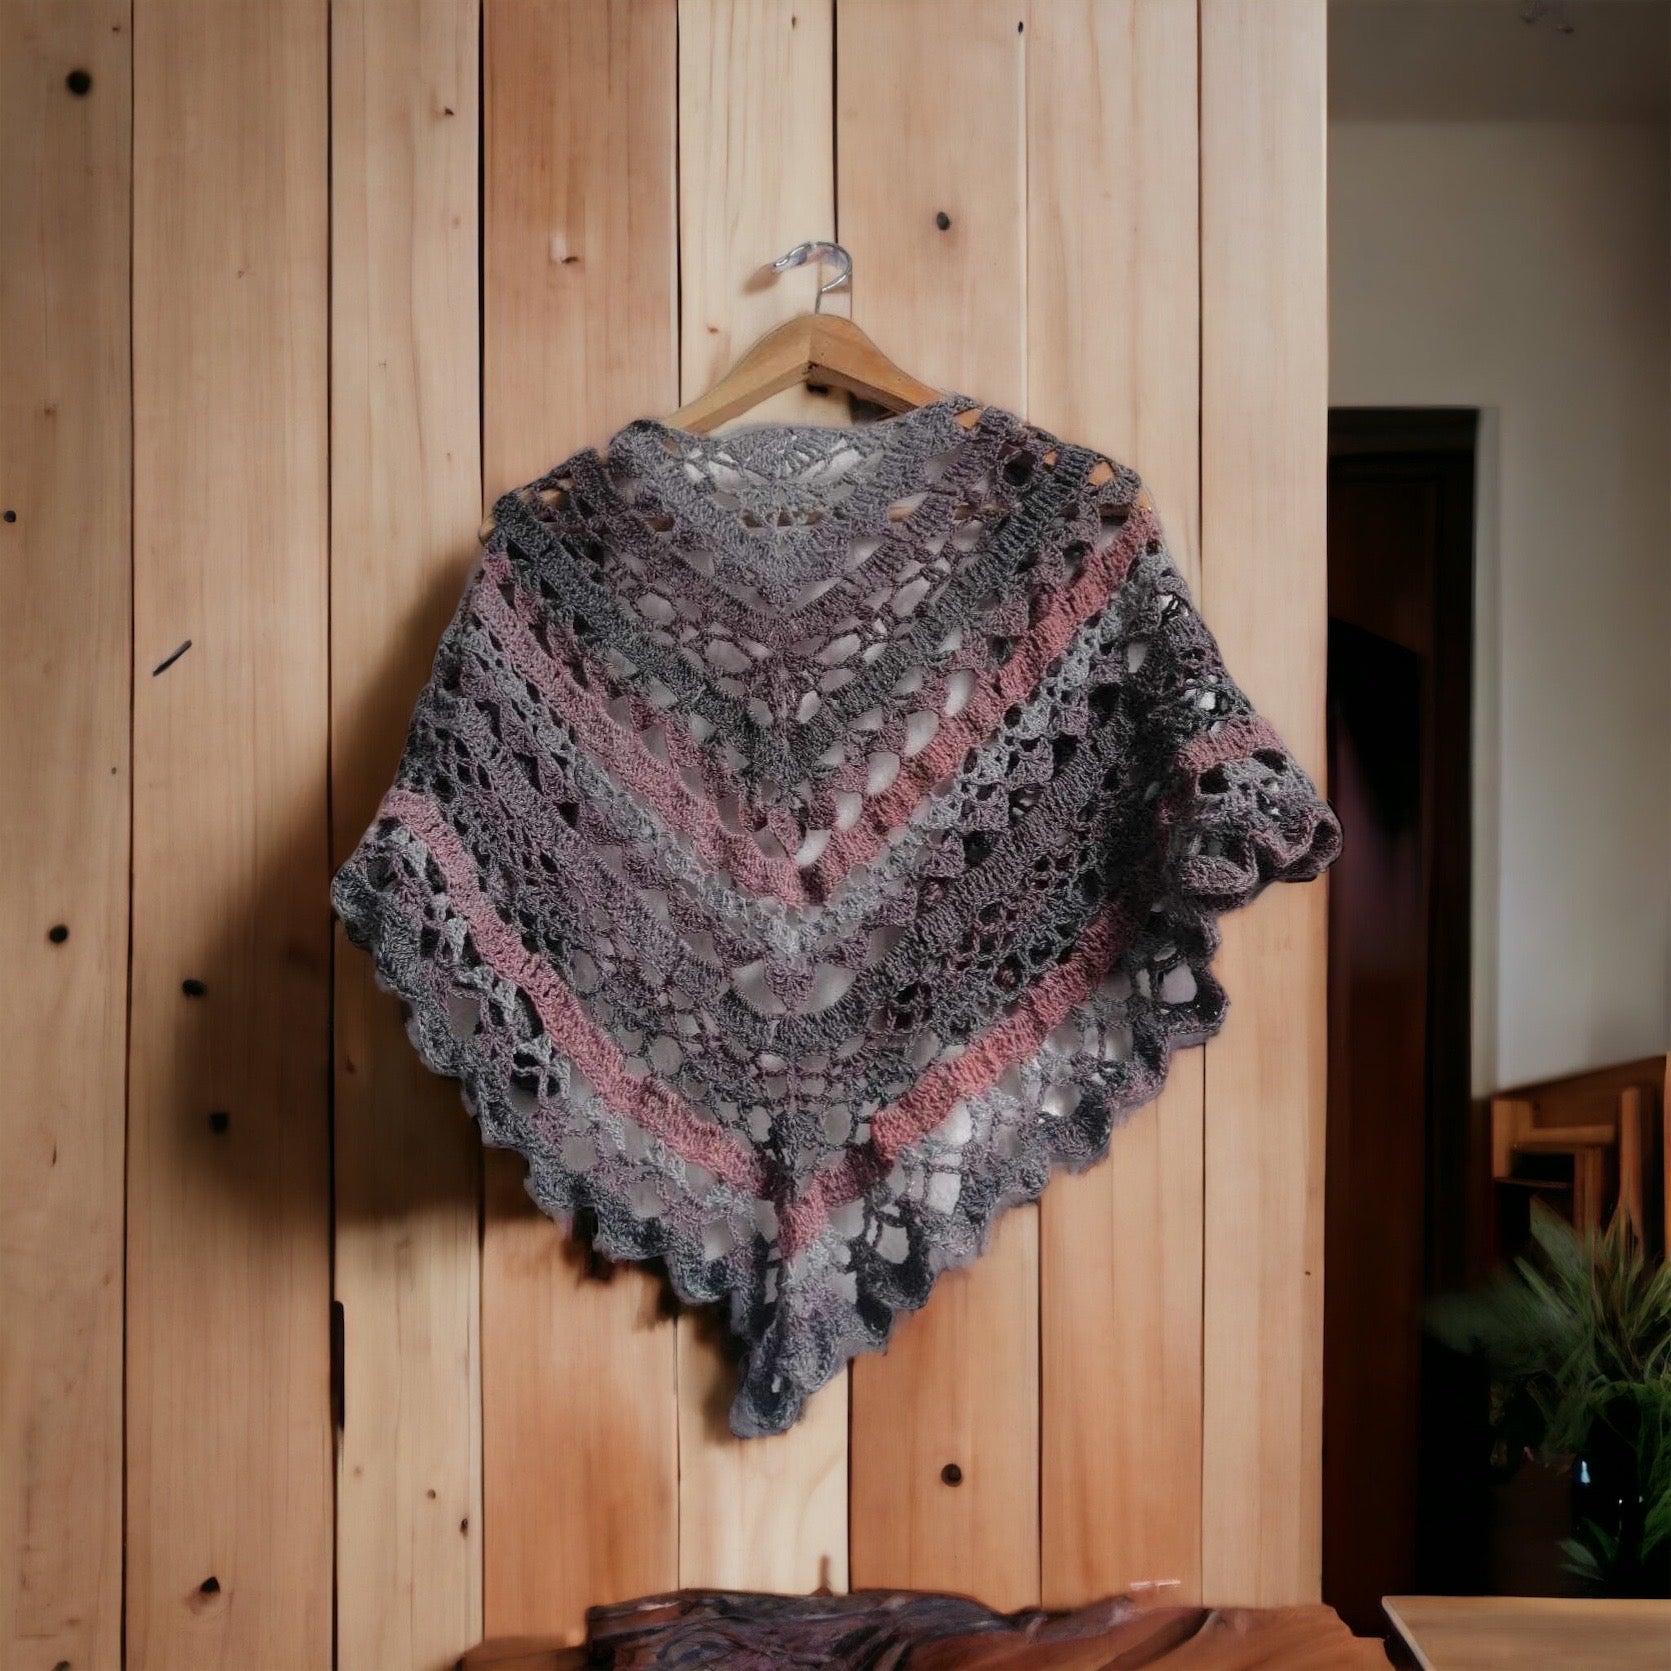 Shown is our 'Nightfall Crochet Shawl' in full scale, where you can see the pattern and evening style colours.